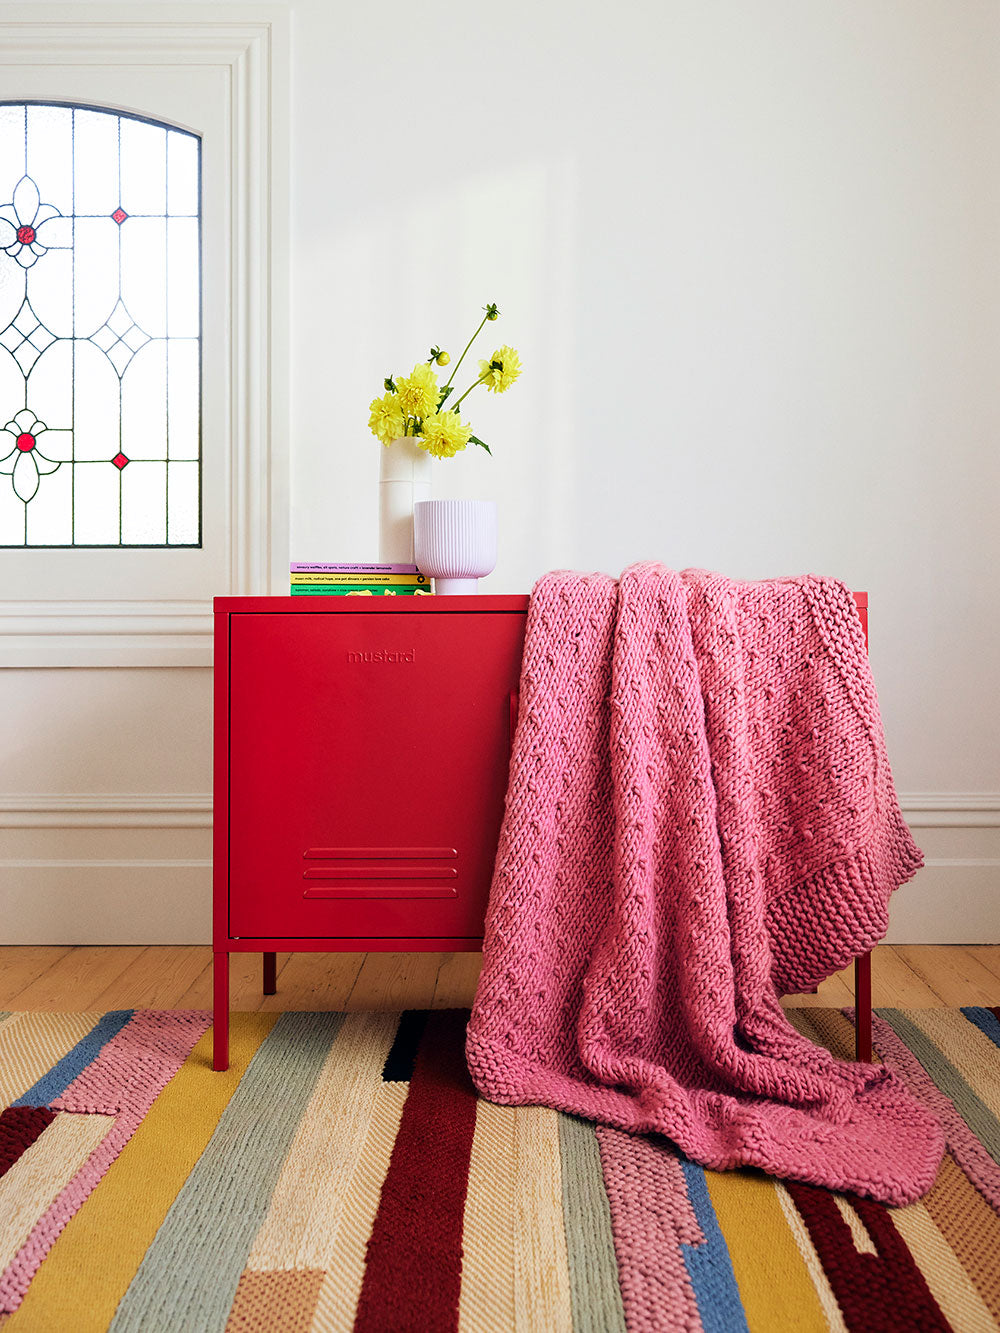 Photo of a dusty pink chunky knitted blanket draped over a red locker.